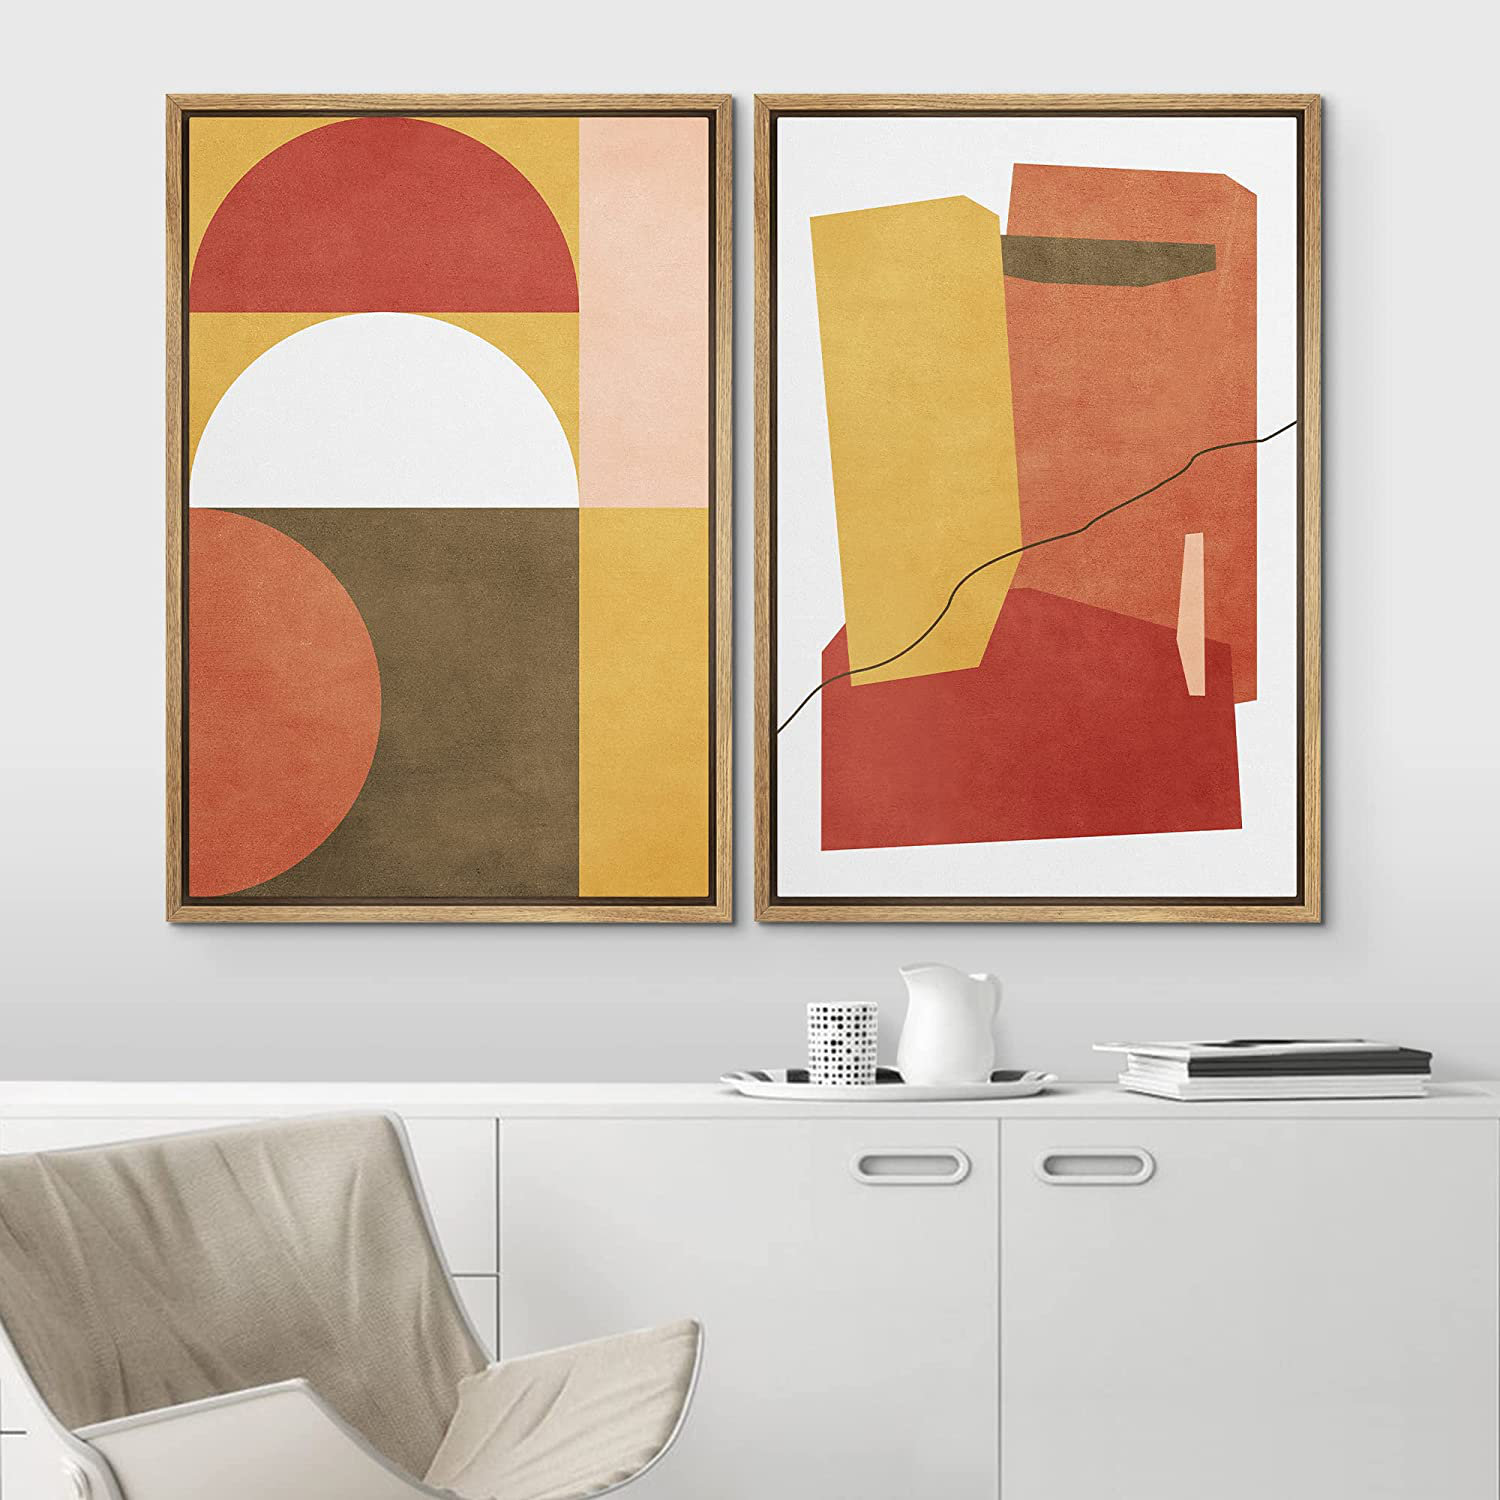 IDEA4WALL Abstract Vibrant Color Blocks Mid-century Modern Multicolor Block  Colorful Framed Abstract Geometric Canvas Print Wall Art Framed On Canvas 3  Pieces Bold Art & Reviews